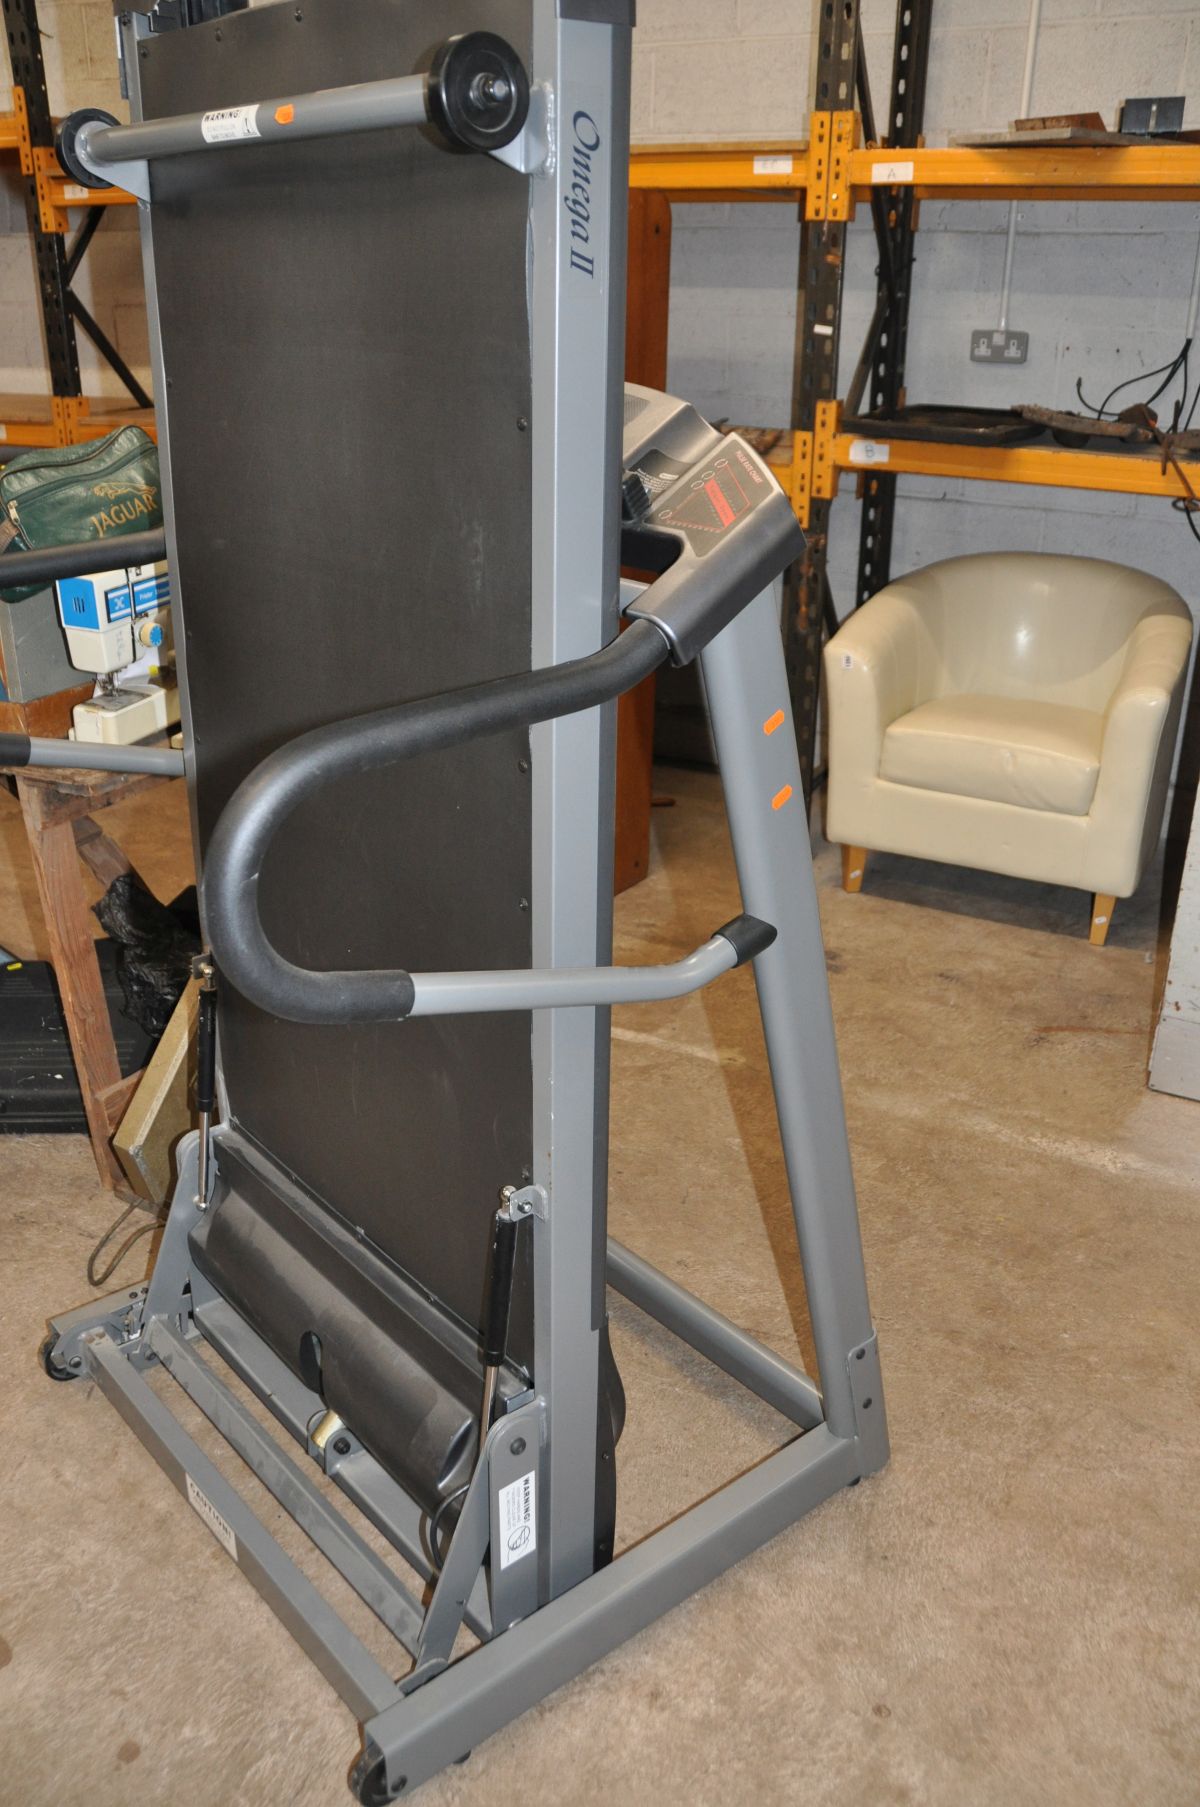 A HORIZON FITNESS OMEGA 2 CS TREADMILL with short power cable and Deadmans switch ( PAT pass and - Image 4 of 4